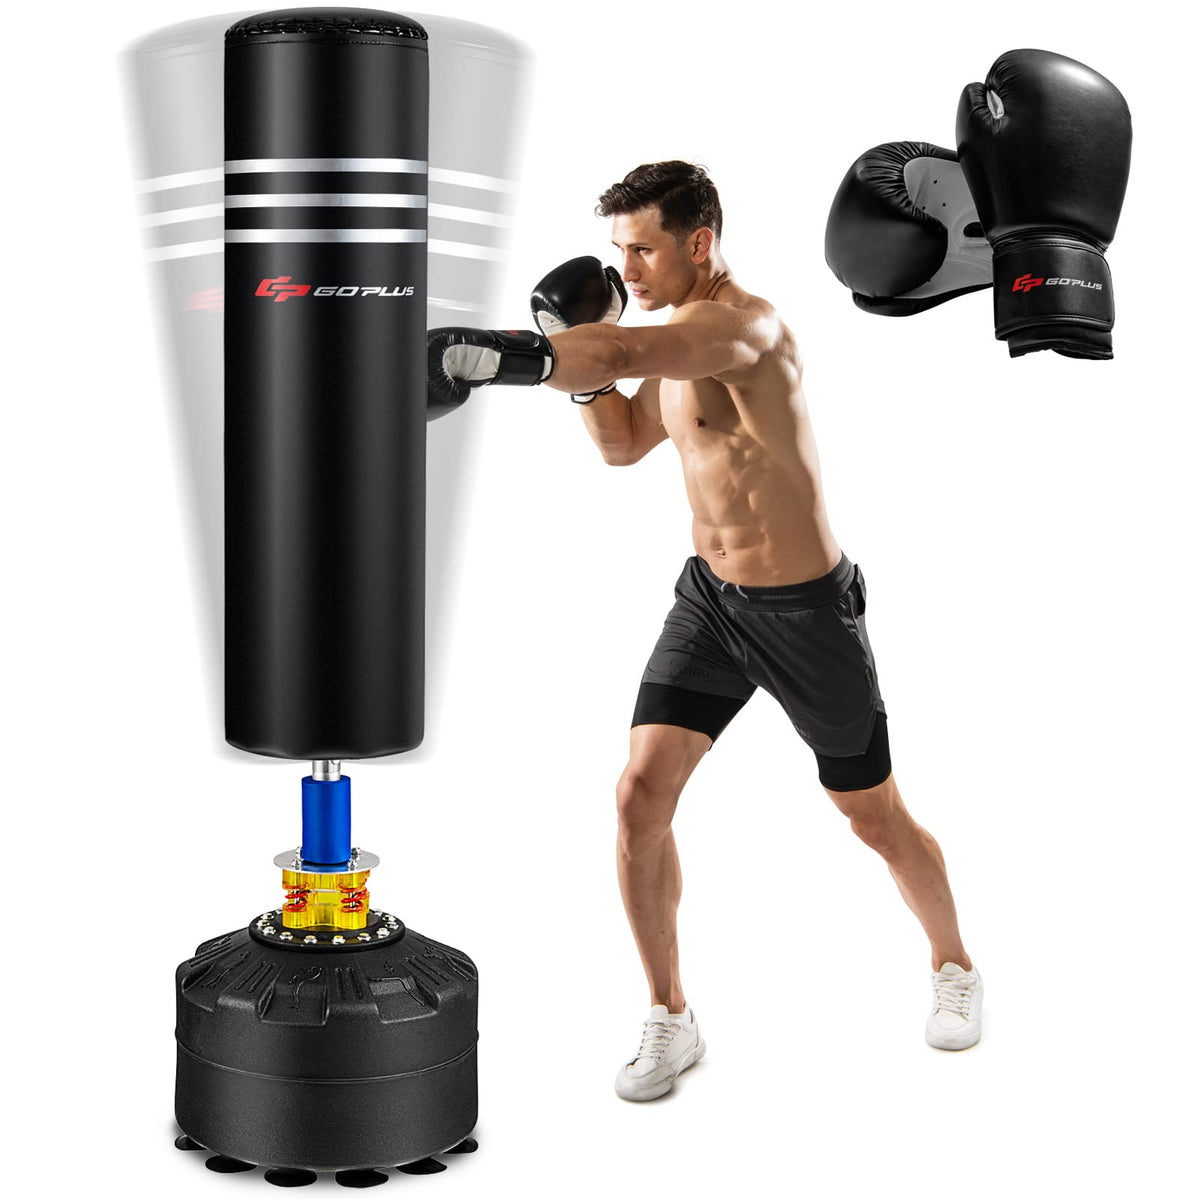 Goplus Freestanding Punching Bag 70", 220lbs Heavy Boxing Bag with Gloves, Shock Absorber, 12 Suction Cup Base - GoplusUS